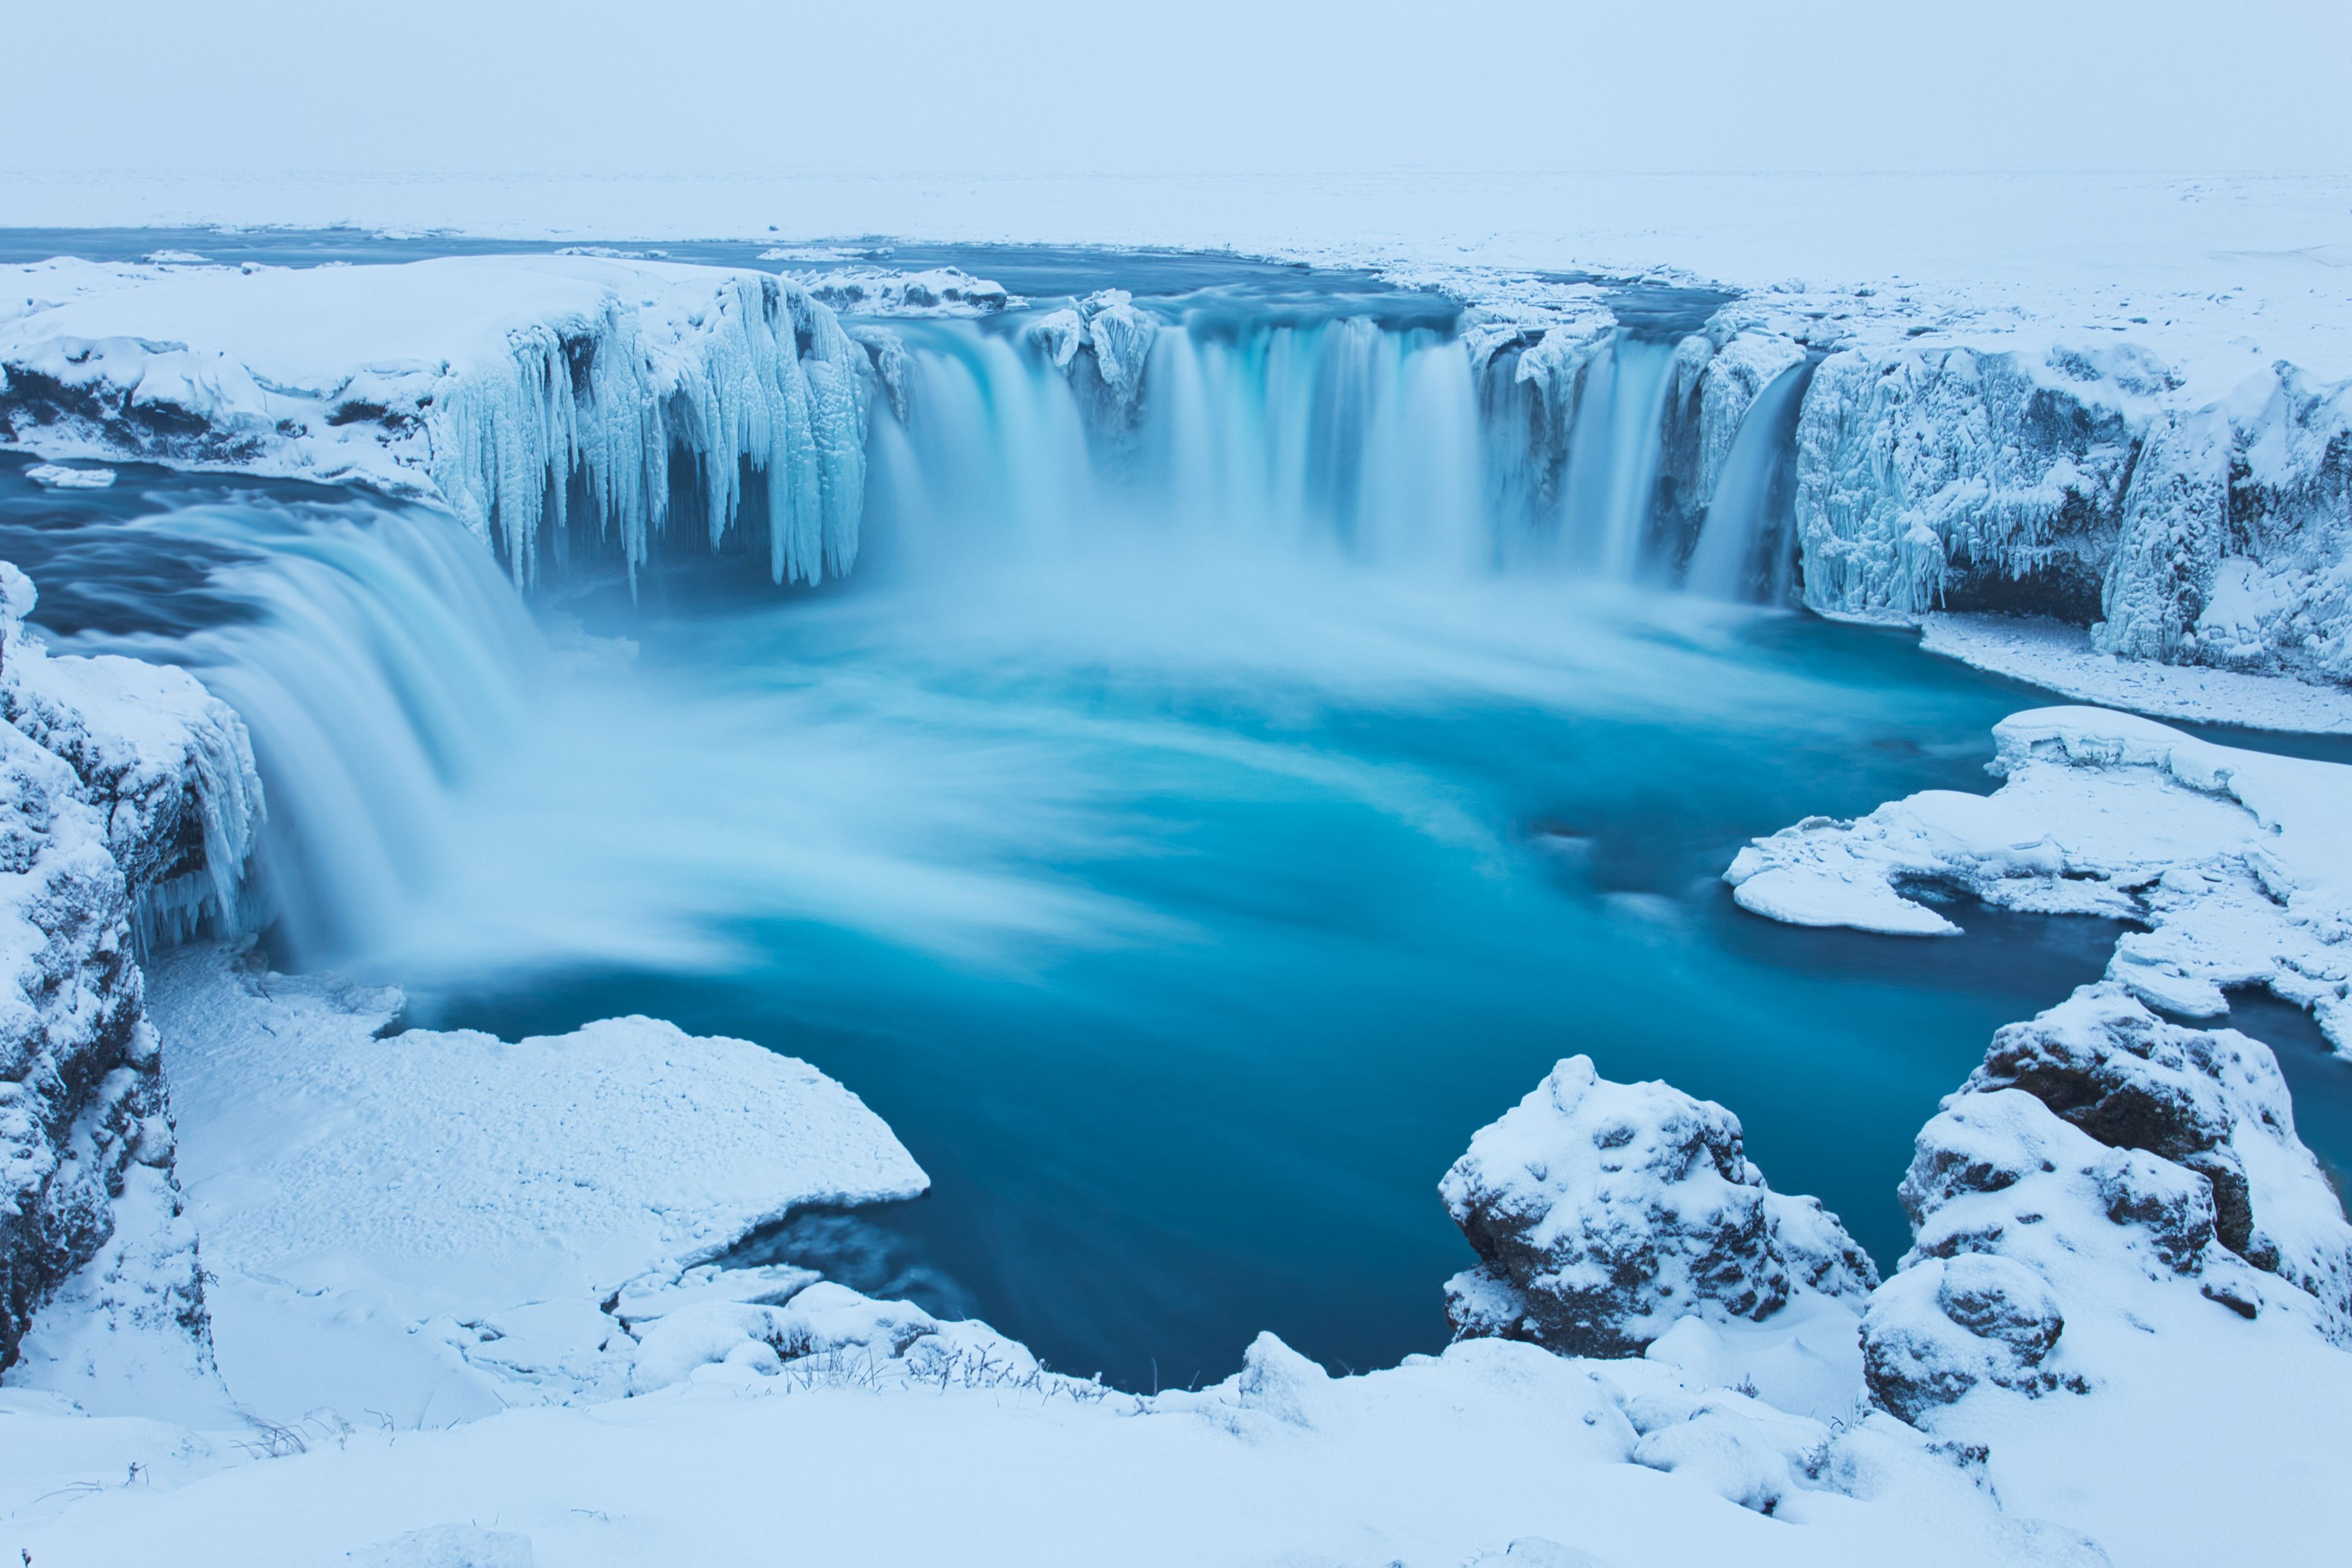 Godafoss Waterfall in Winter Covered in Snow